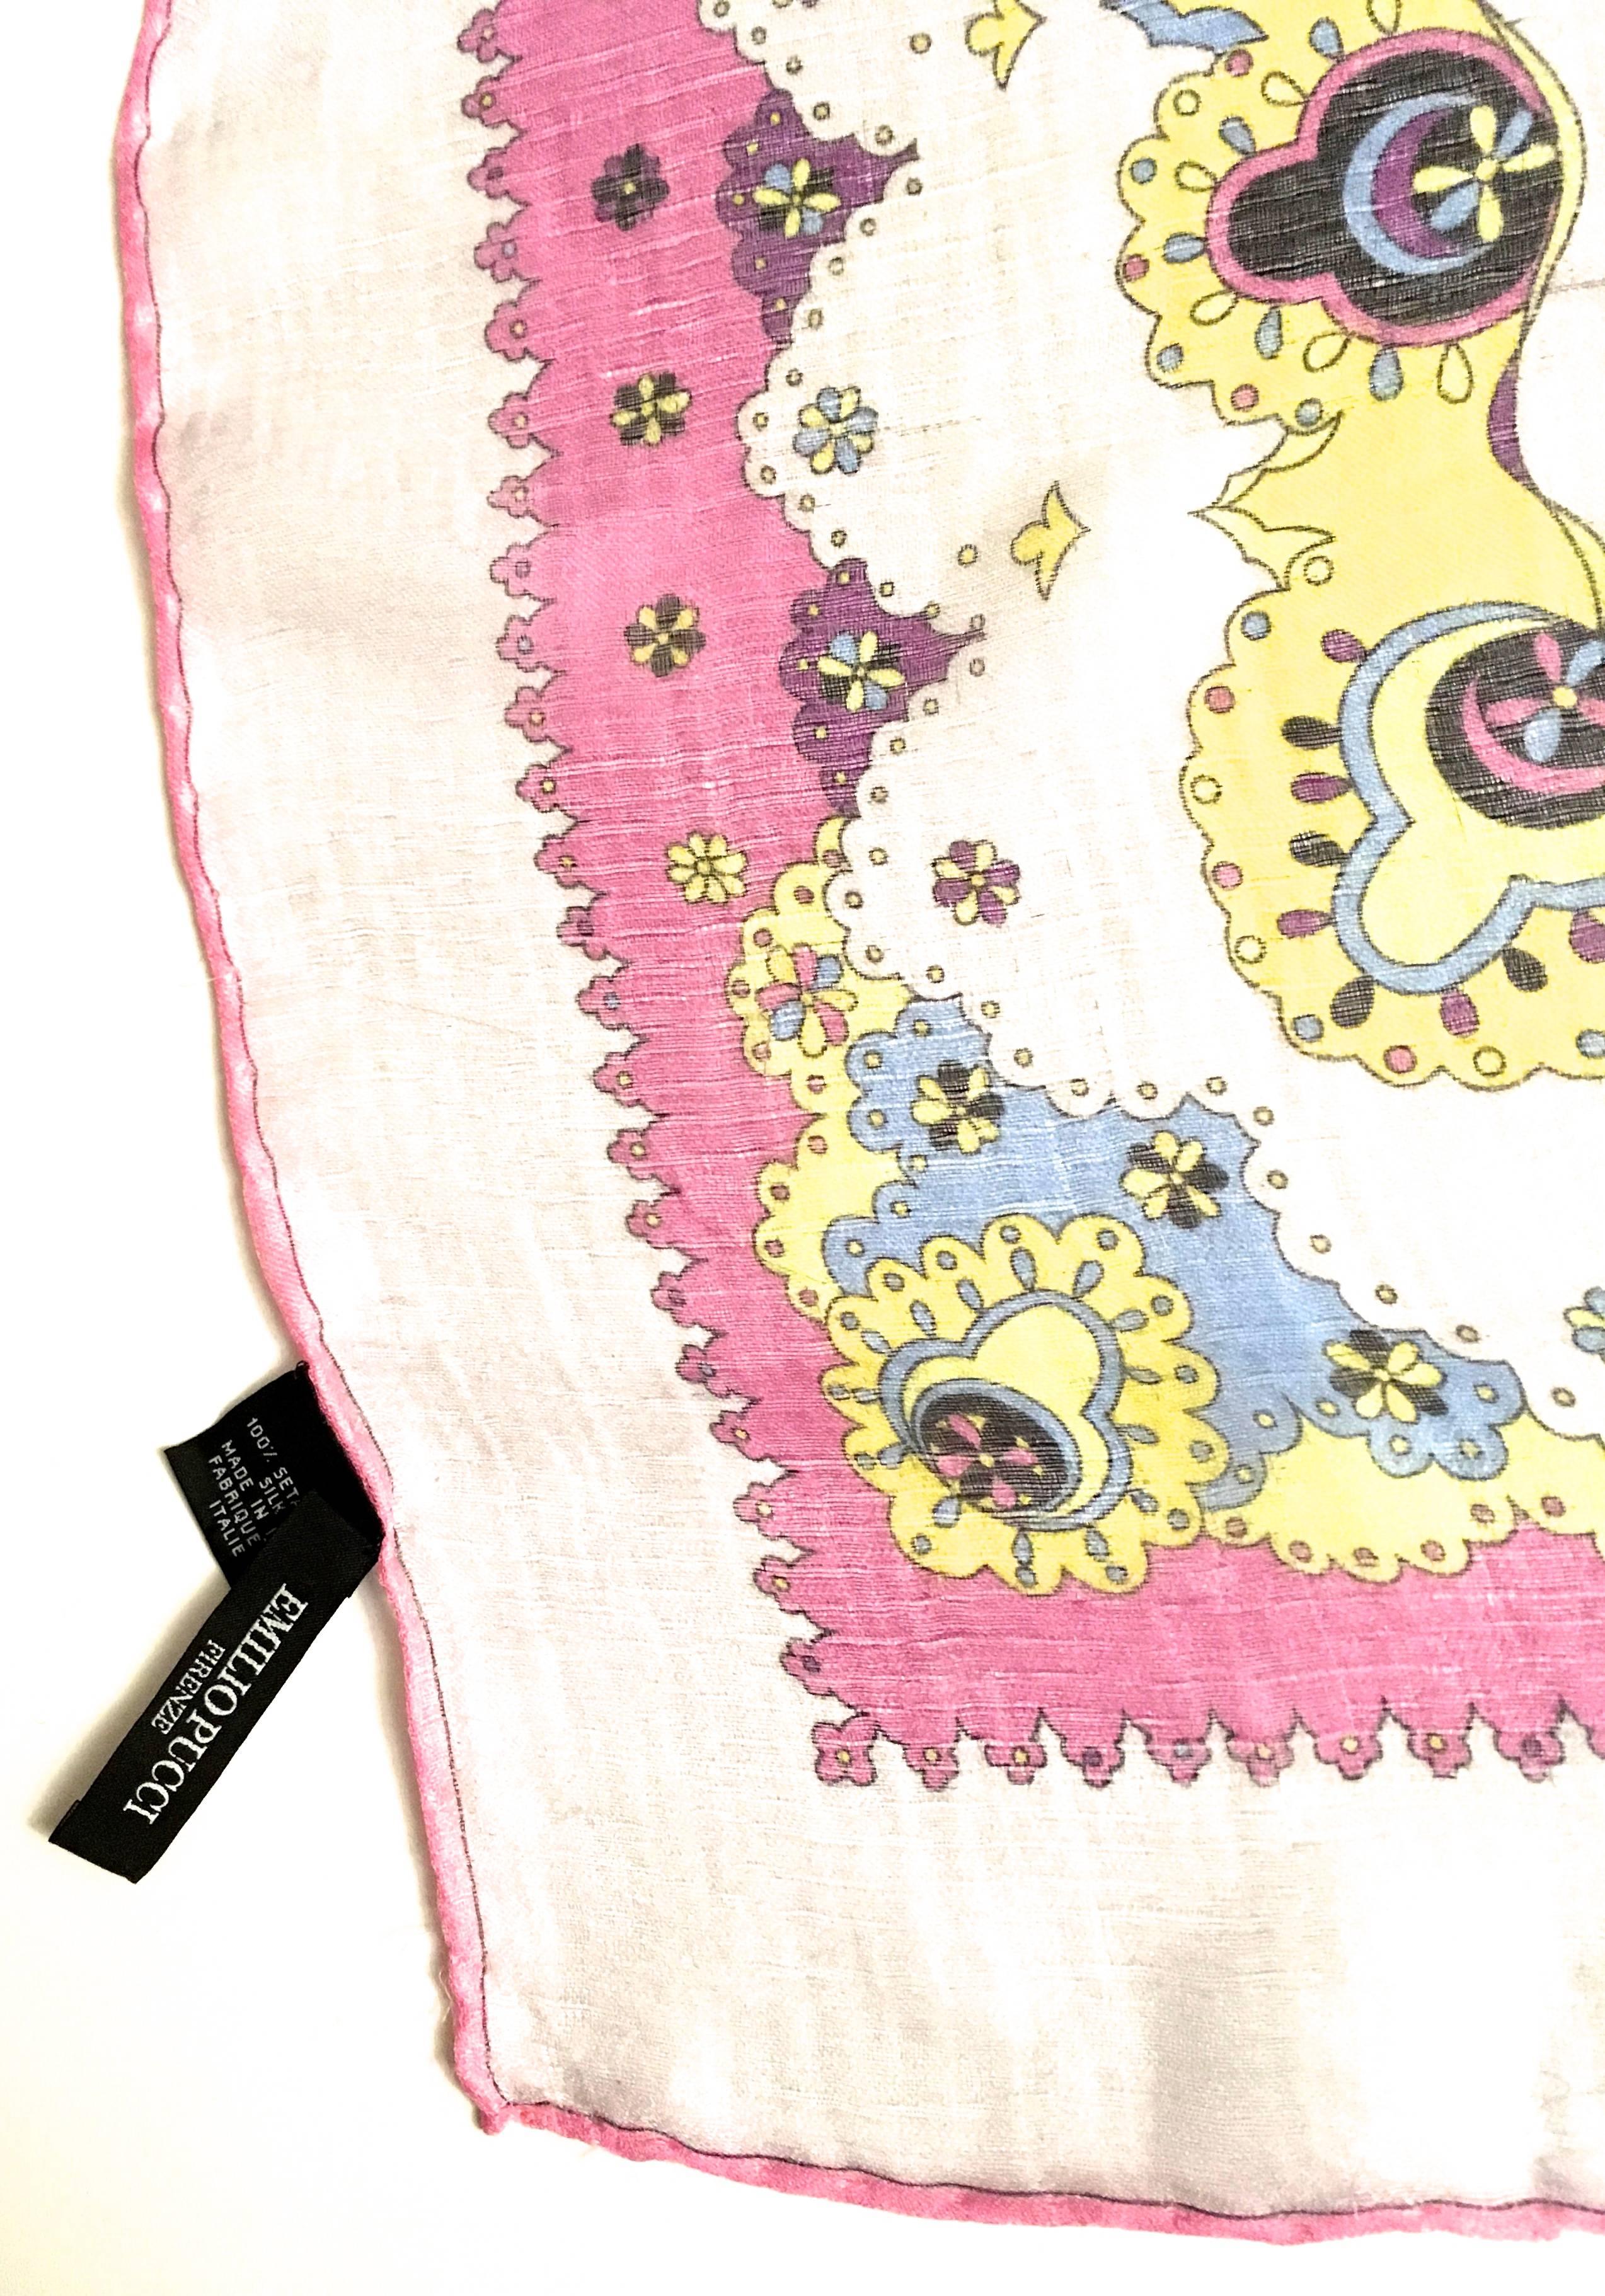 Presented here is a gorgeous Shawl/Scarf from Emilio Pucci.  This fabulous scarf is made from 100% silk muslin fabric that is ultra soft and comfortable to the touch. The scarf is hand rolled with a design in colors of black, yellow, green, white